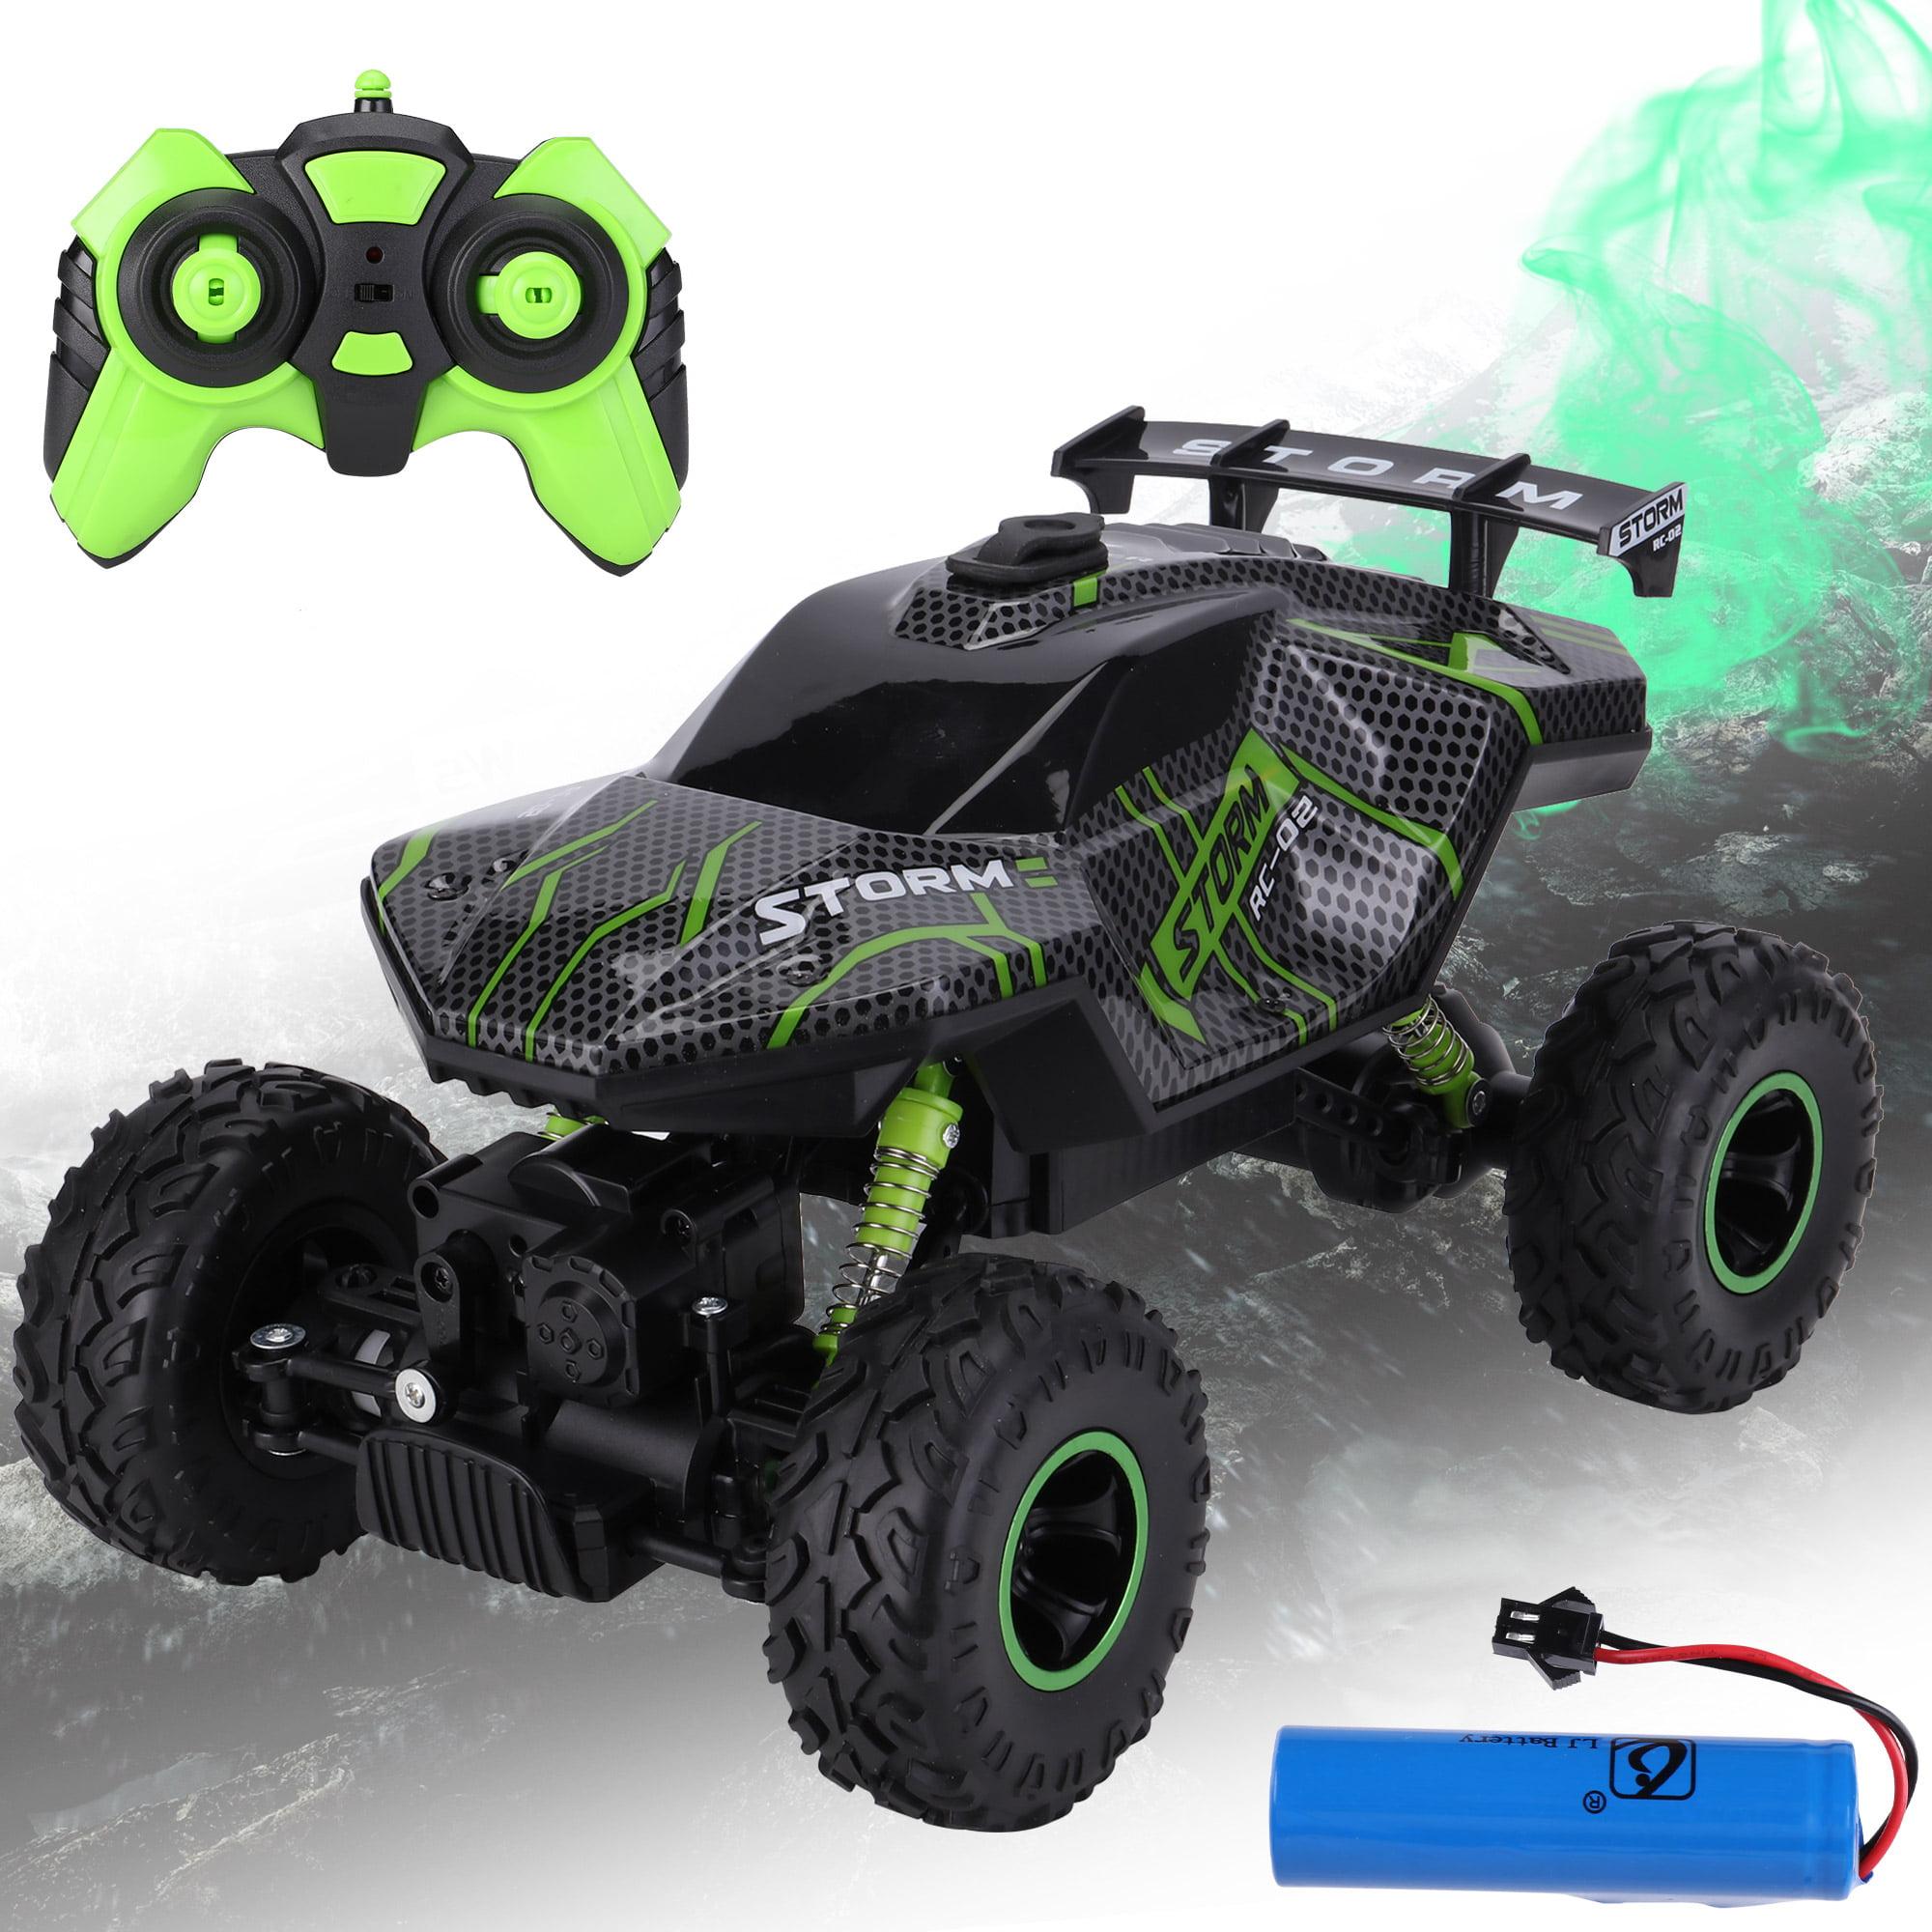 Green Rc Car: Types of Green RC Cars Available